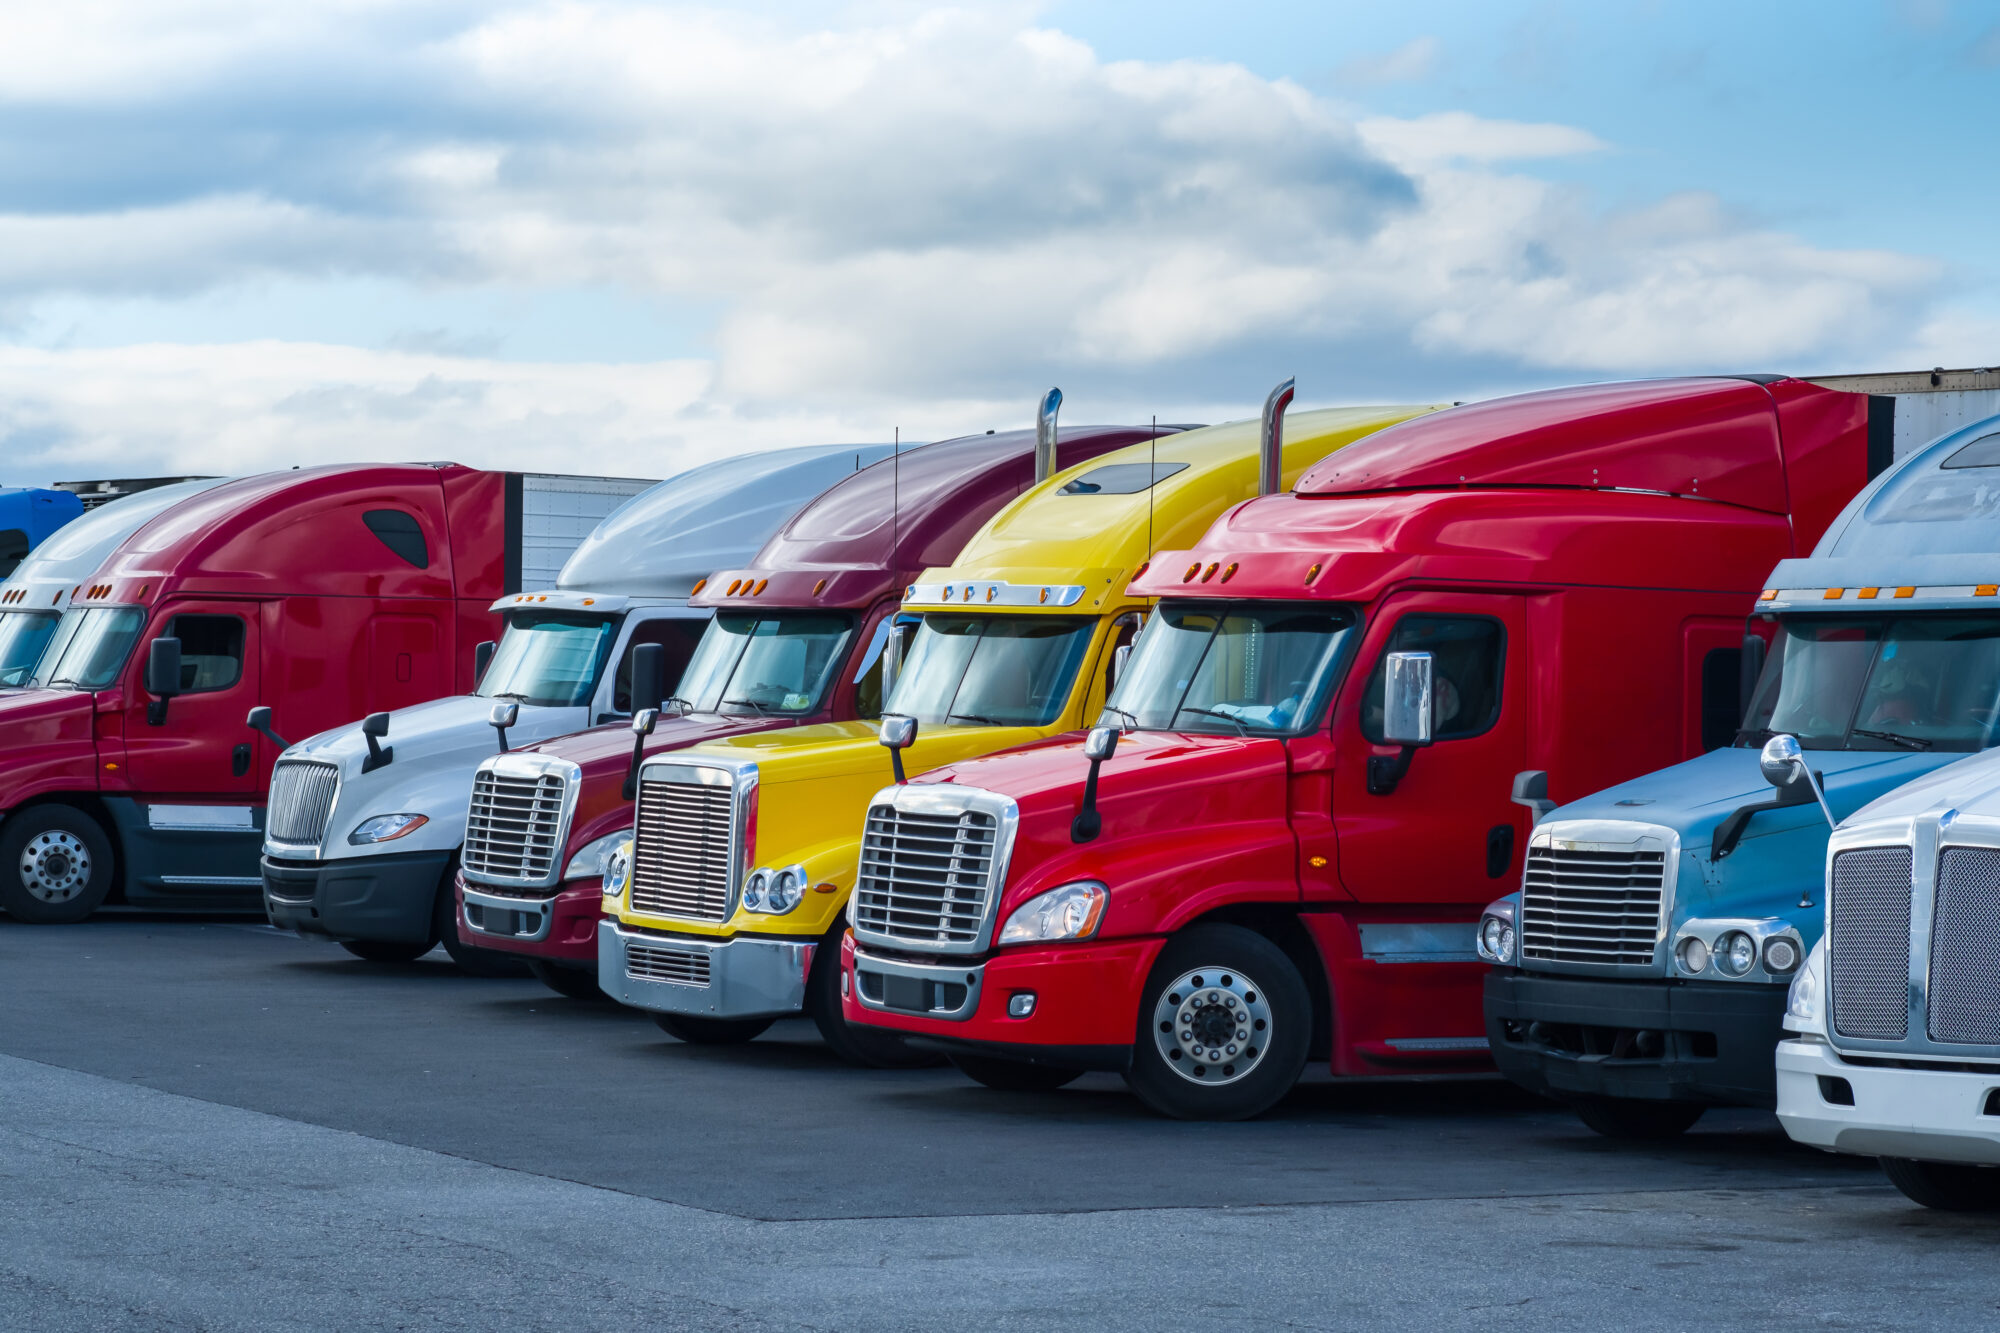 Walmart’s Distribution Operations Include a “Private Fleet of Trucks and a Skilled Staff of Truck Drivers”